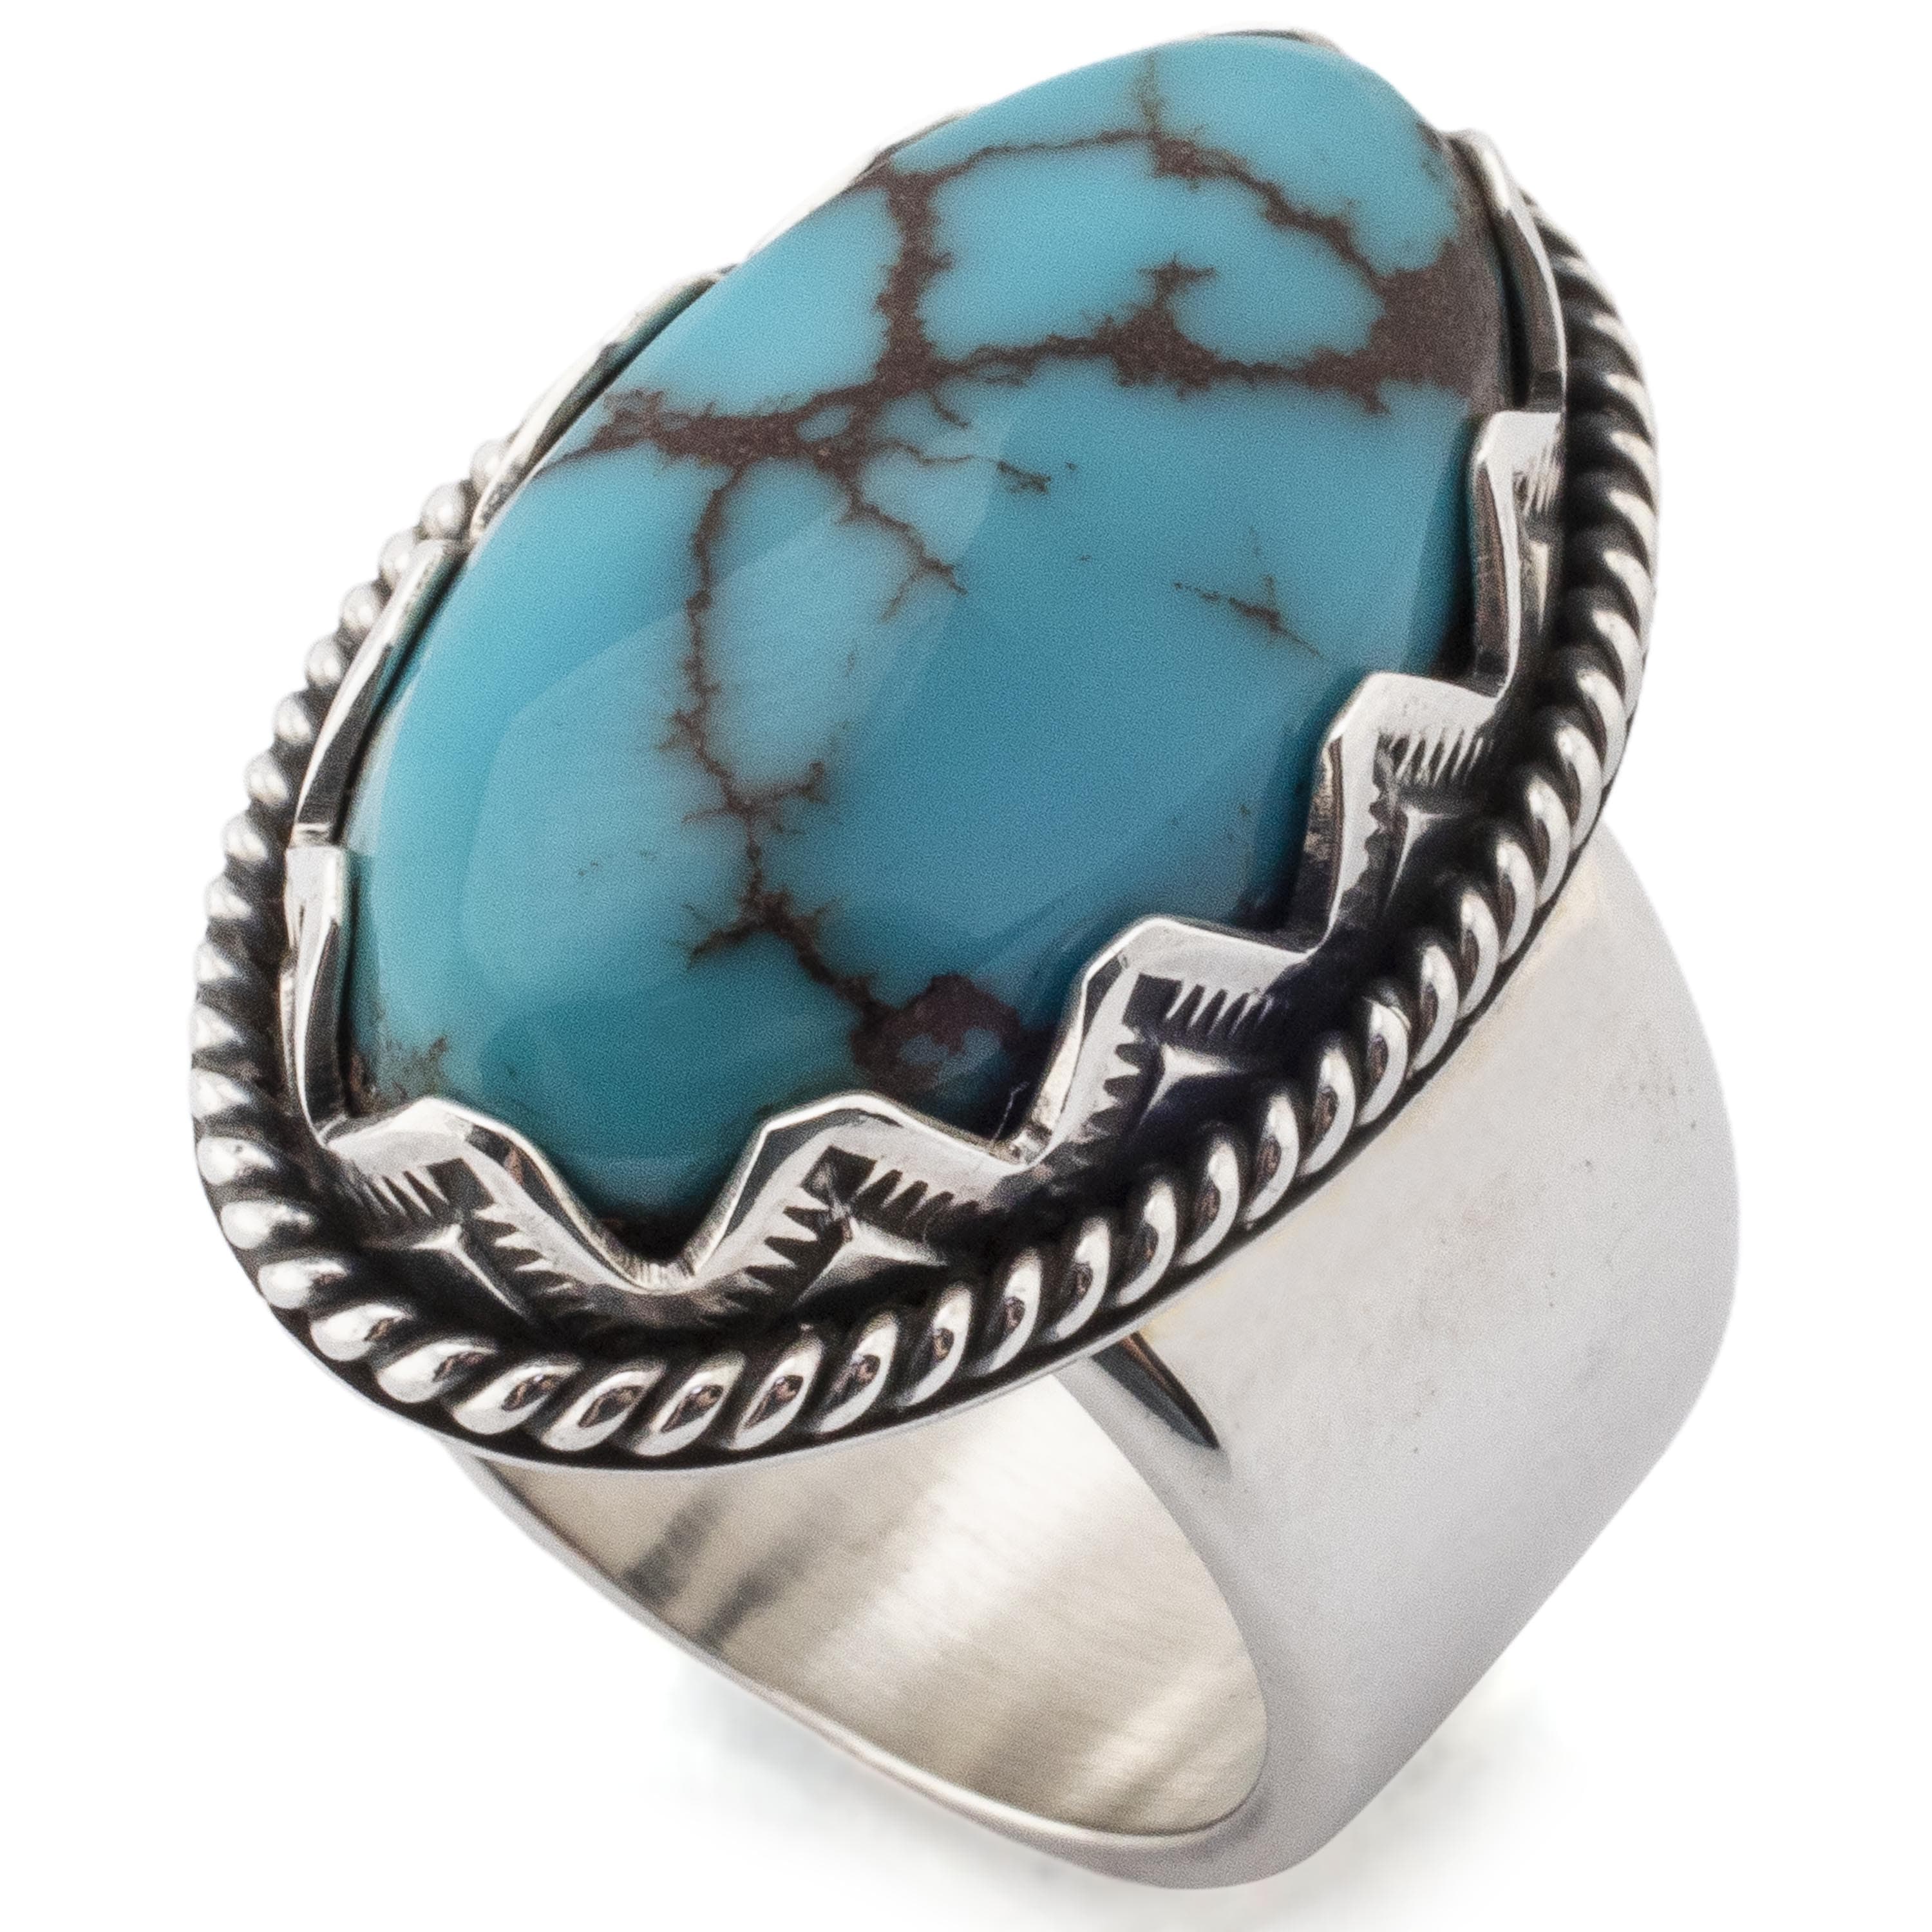 Kalifano Native American Jewelry 9 Elgin Tom Eygptian Turquoise USA Native American Made 925 Sterling Silver Ring NAR1000.009.9